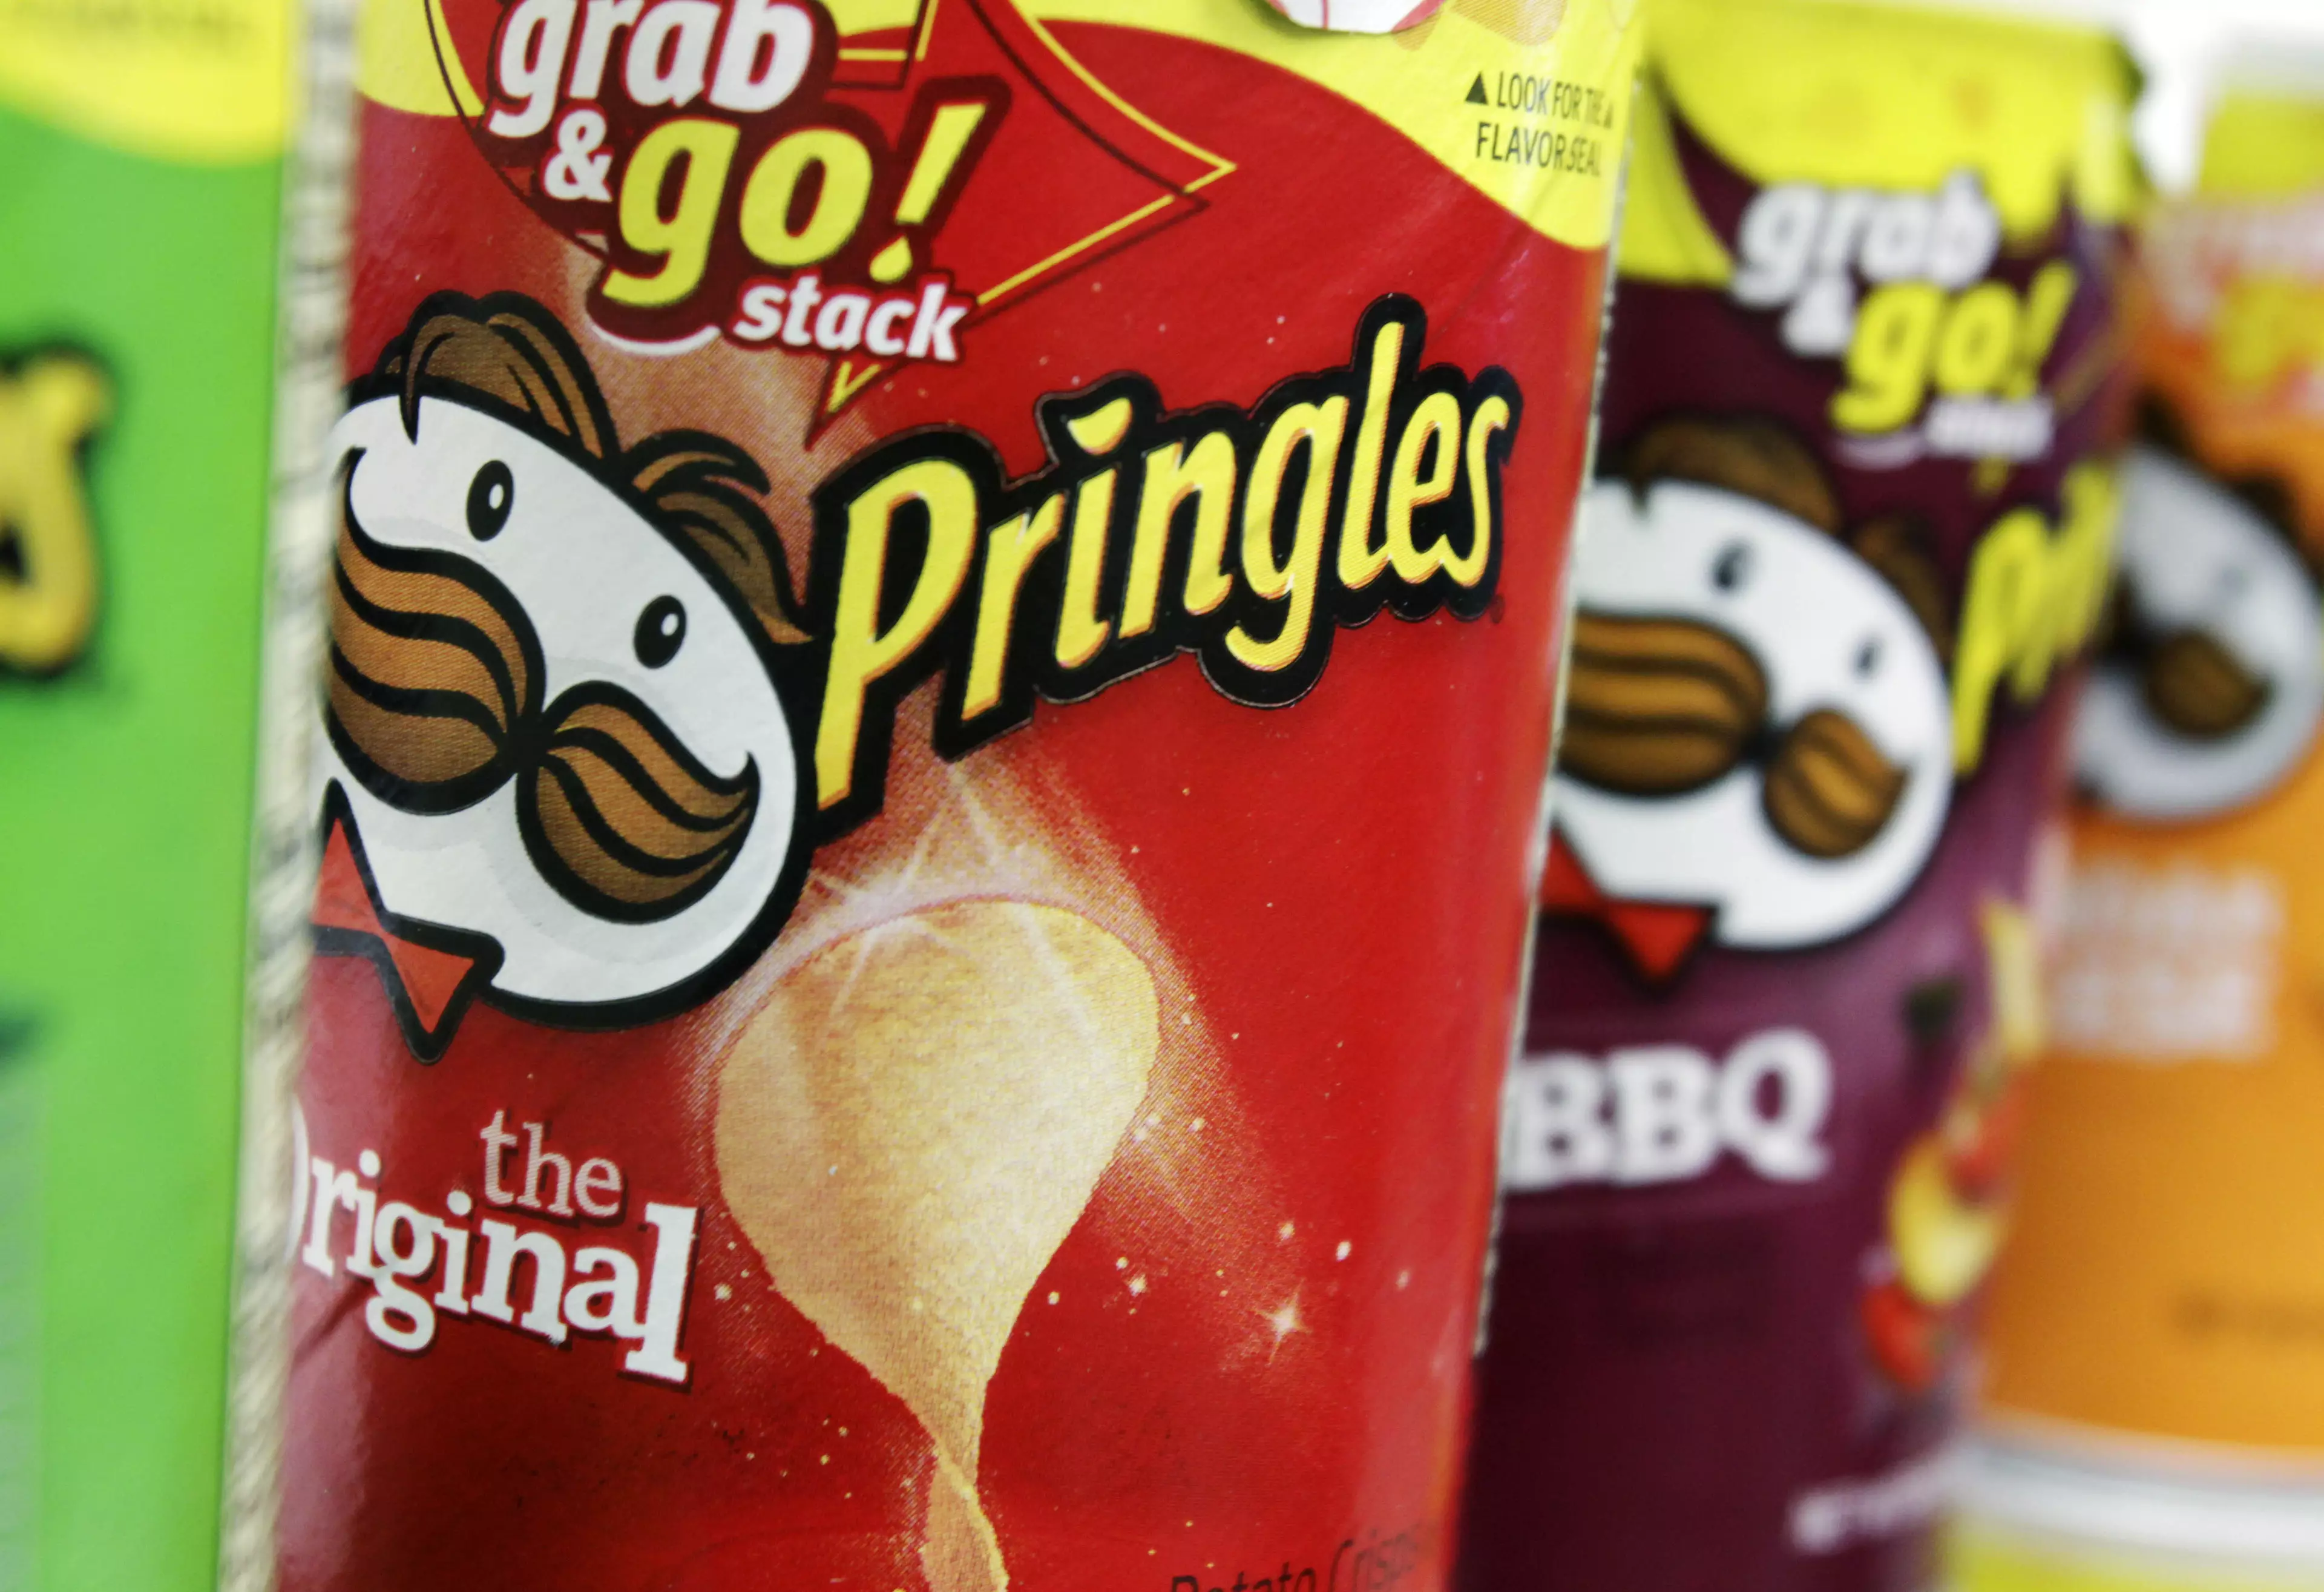 Let’s Clear This Up Once And For All, Pringles Are Biscuits And Not Crisps